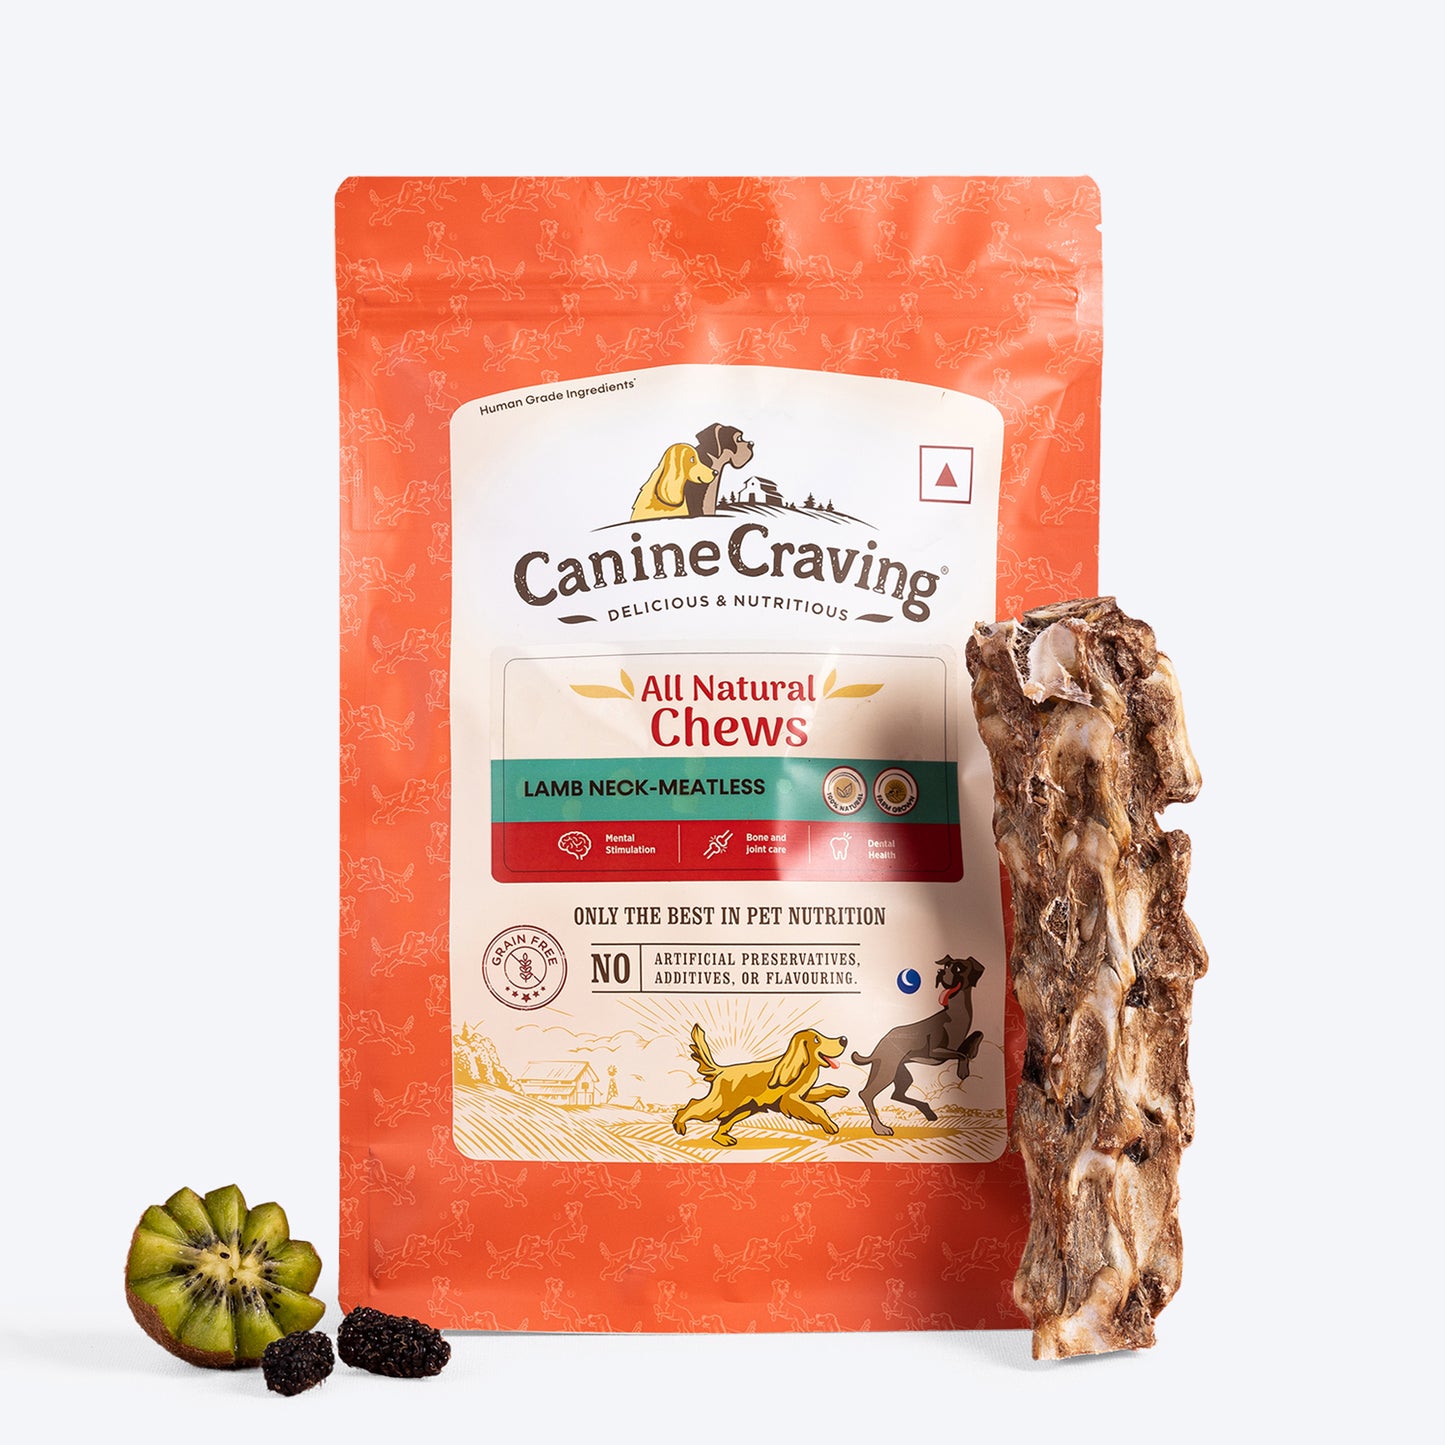 Canine Craving Bone Chew - Meatless Lamb Neck Dog Chew Treat - 1 Piece - Heads Up For Tails